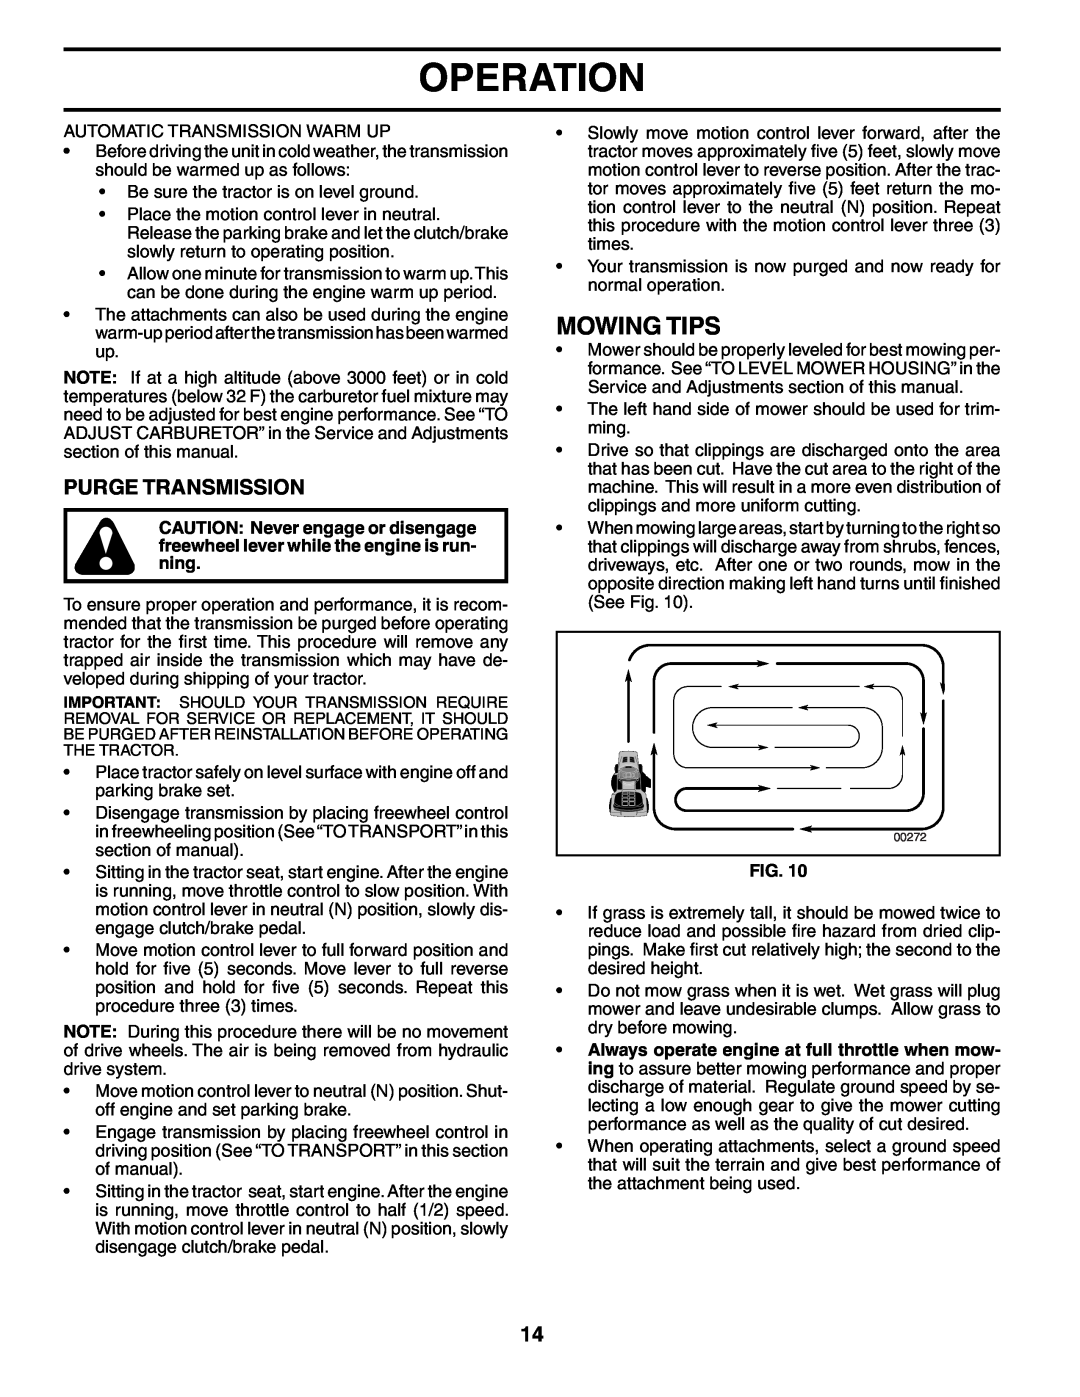 Poulan PD18H42STB owner manual Mowing Tips, Purge Transmission, Operation 